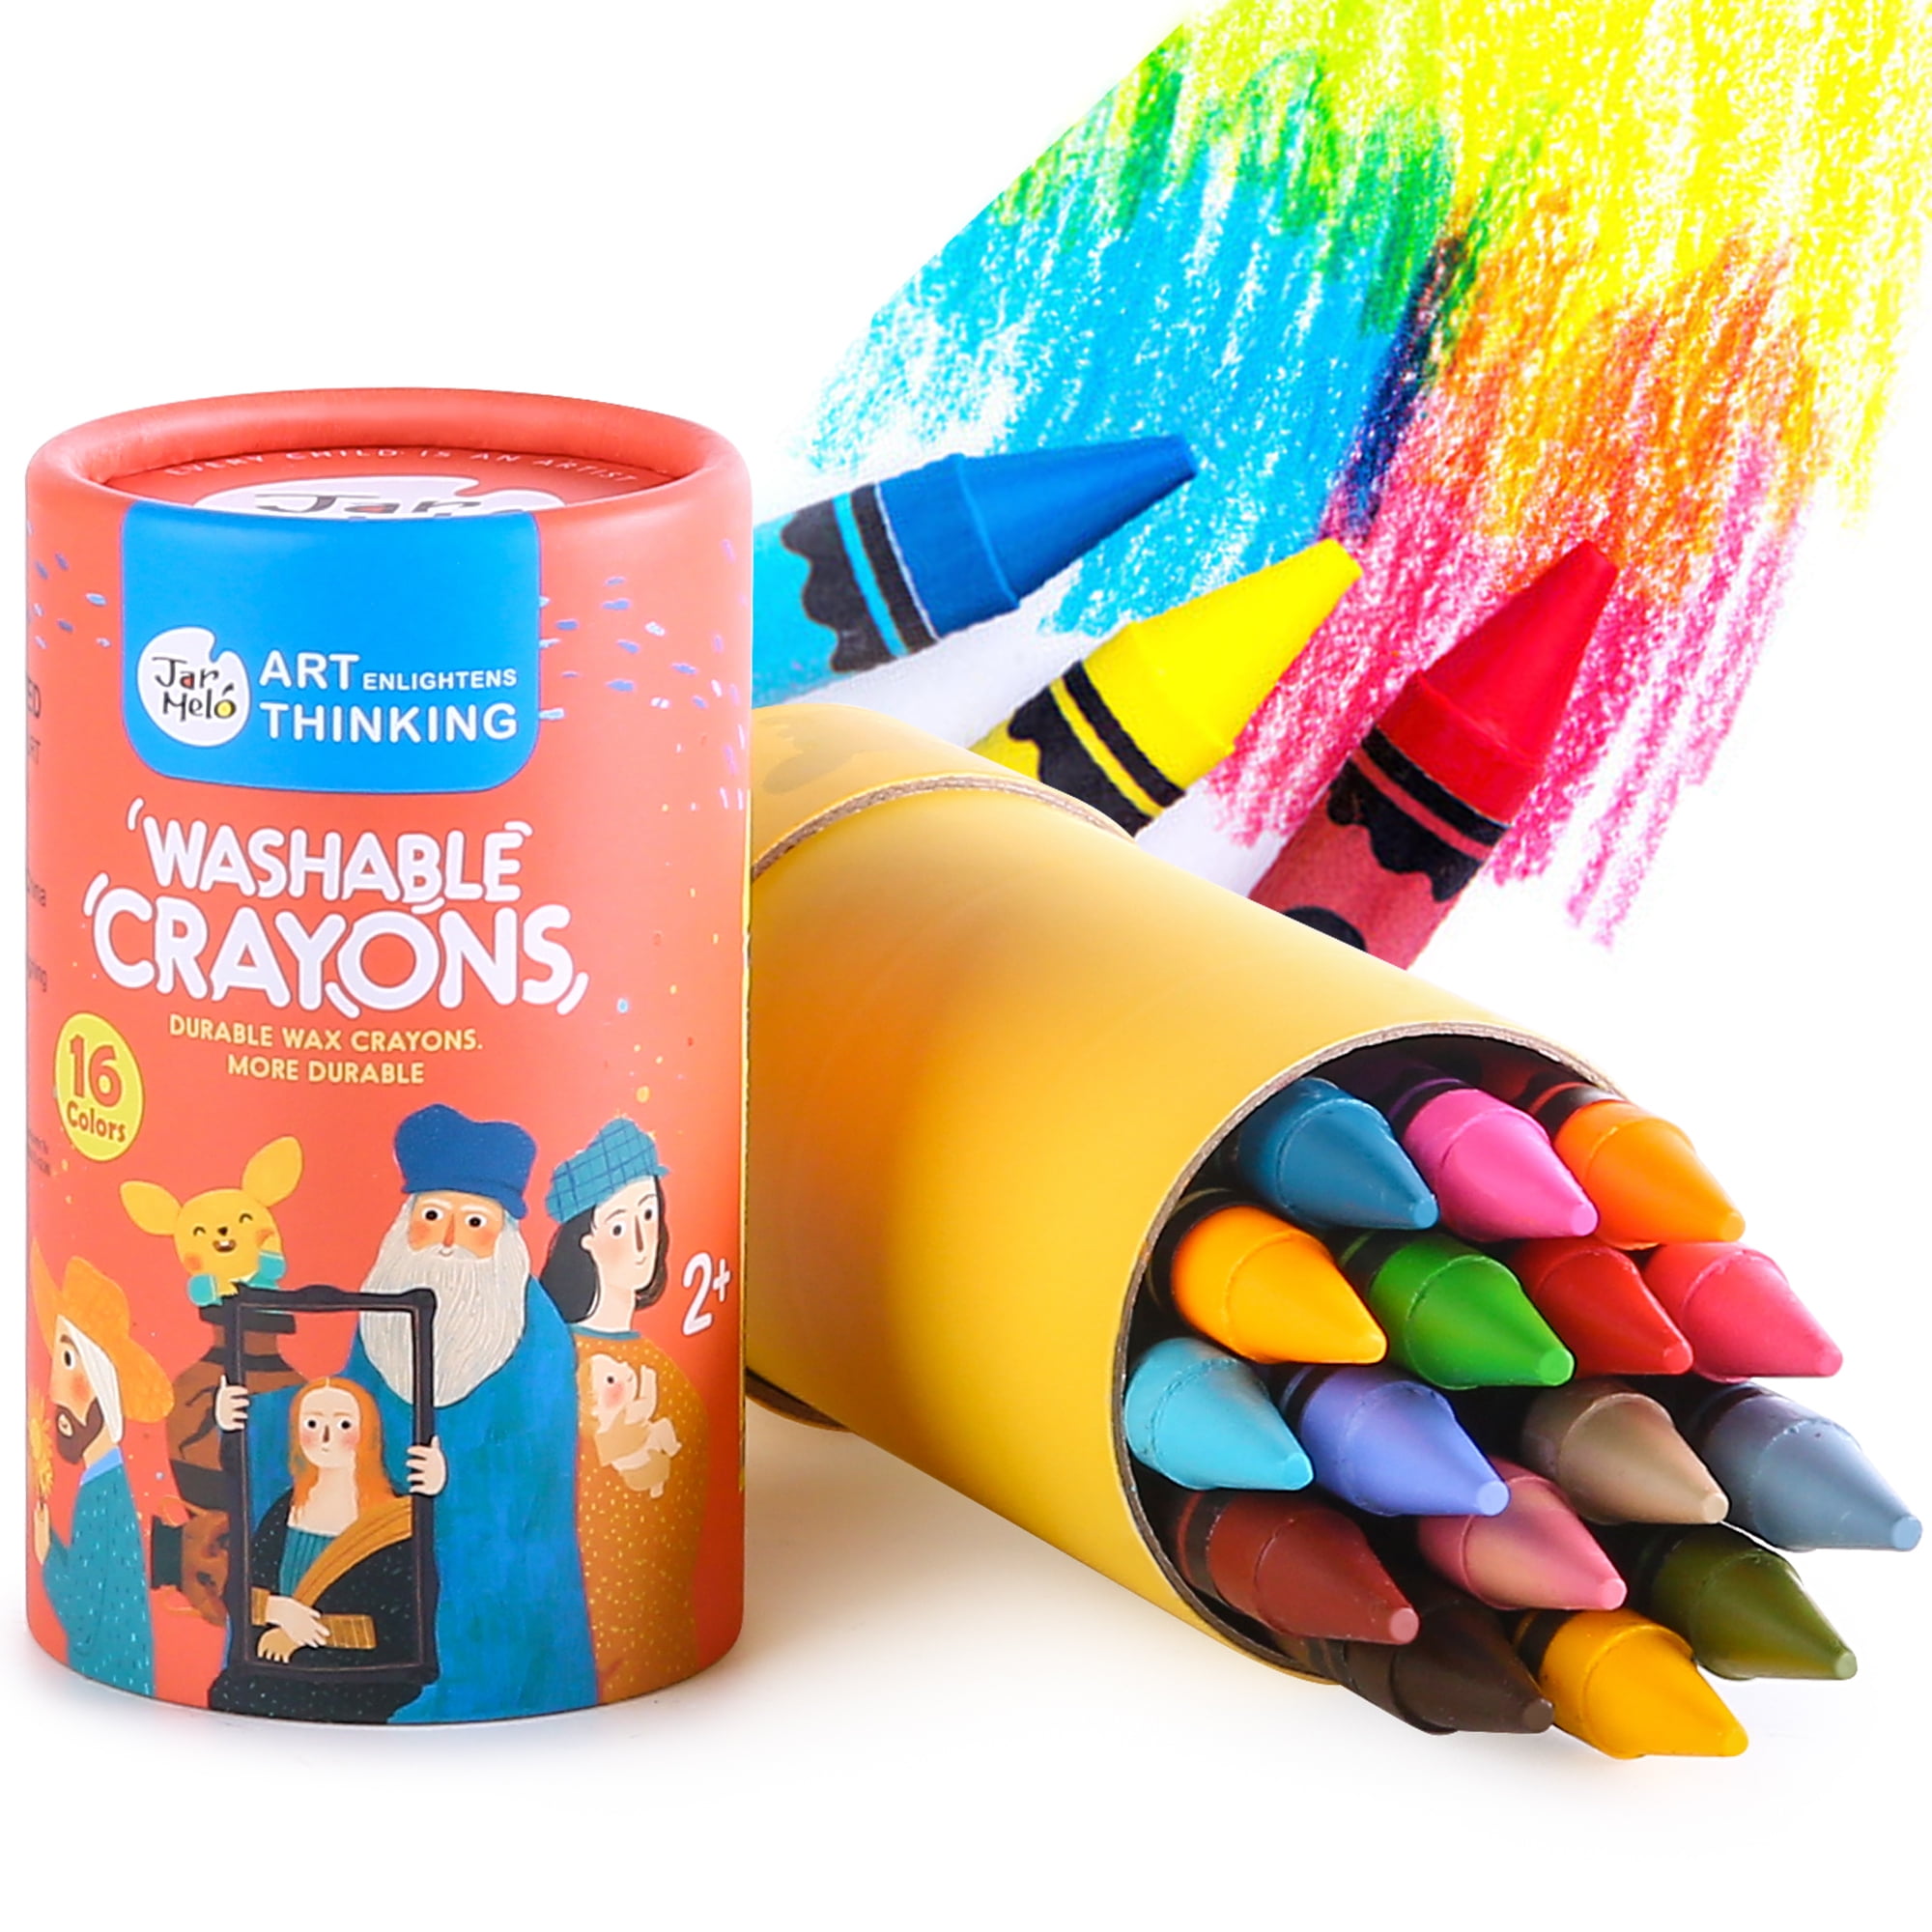 18 Colors Jumbo Crayons for Kids Ages 2-4 - Non Toxic Washable